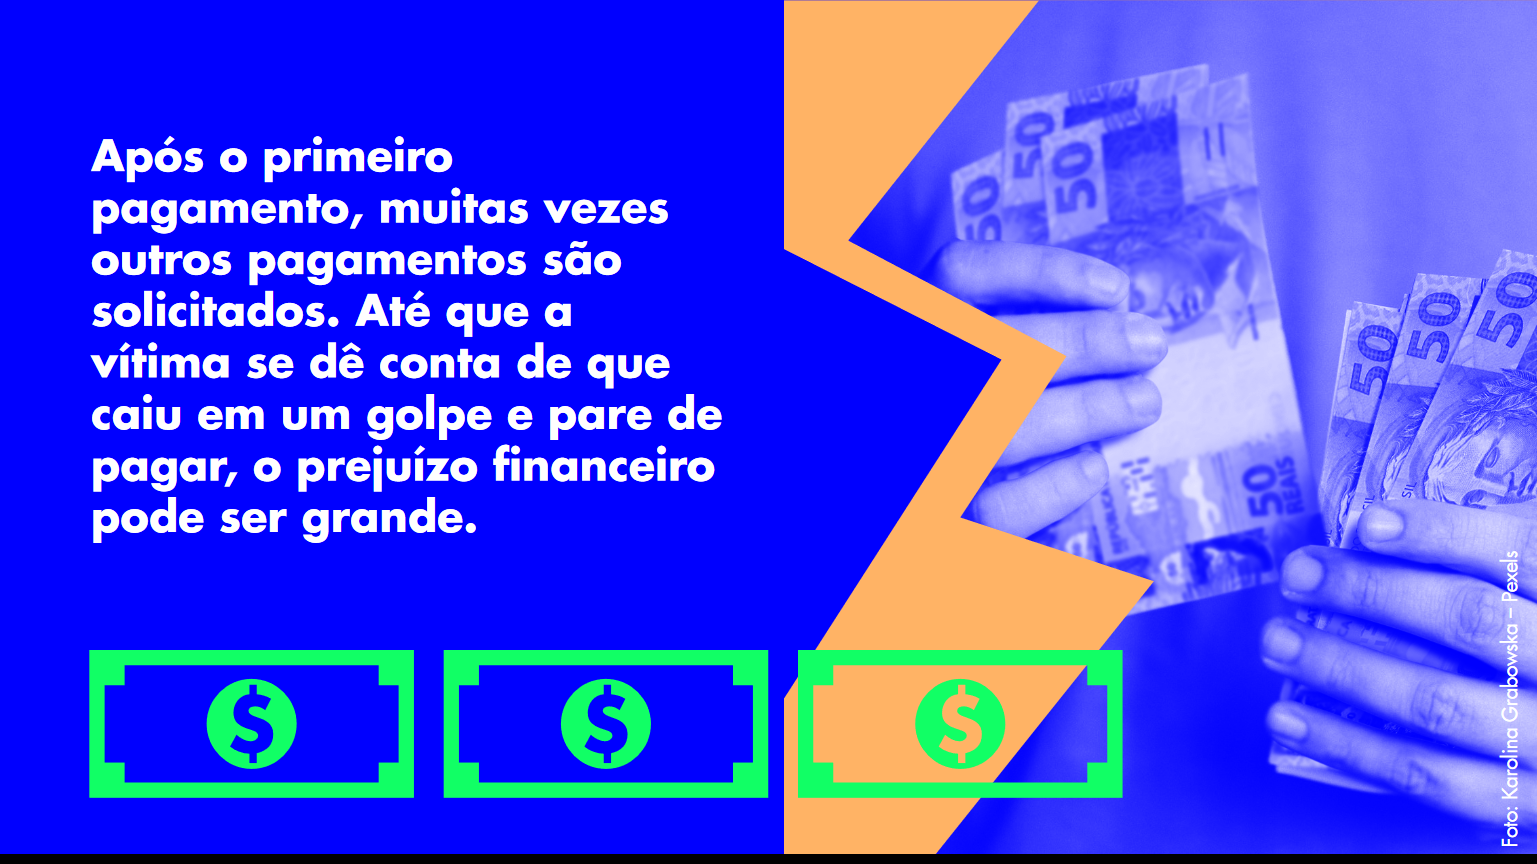 golpe-do-falso-emprestimo-4-mpmg.png